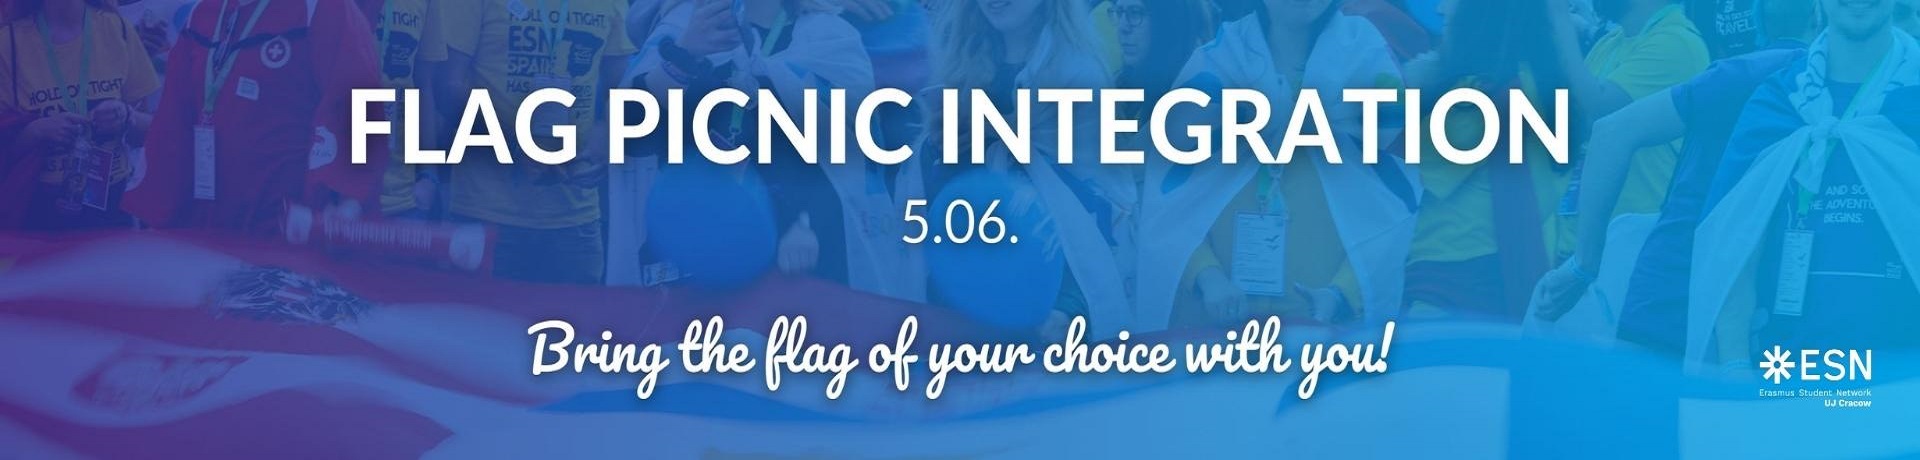 Flag Picnic Integration with ESN UJ Cracow and ESN United